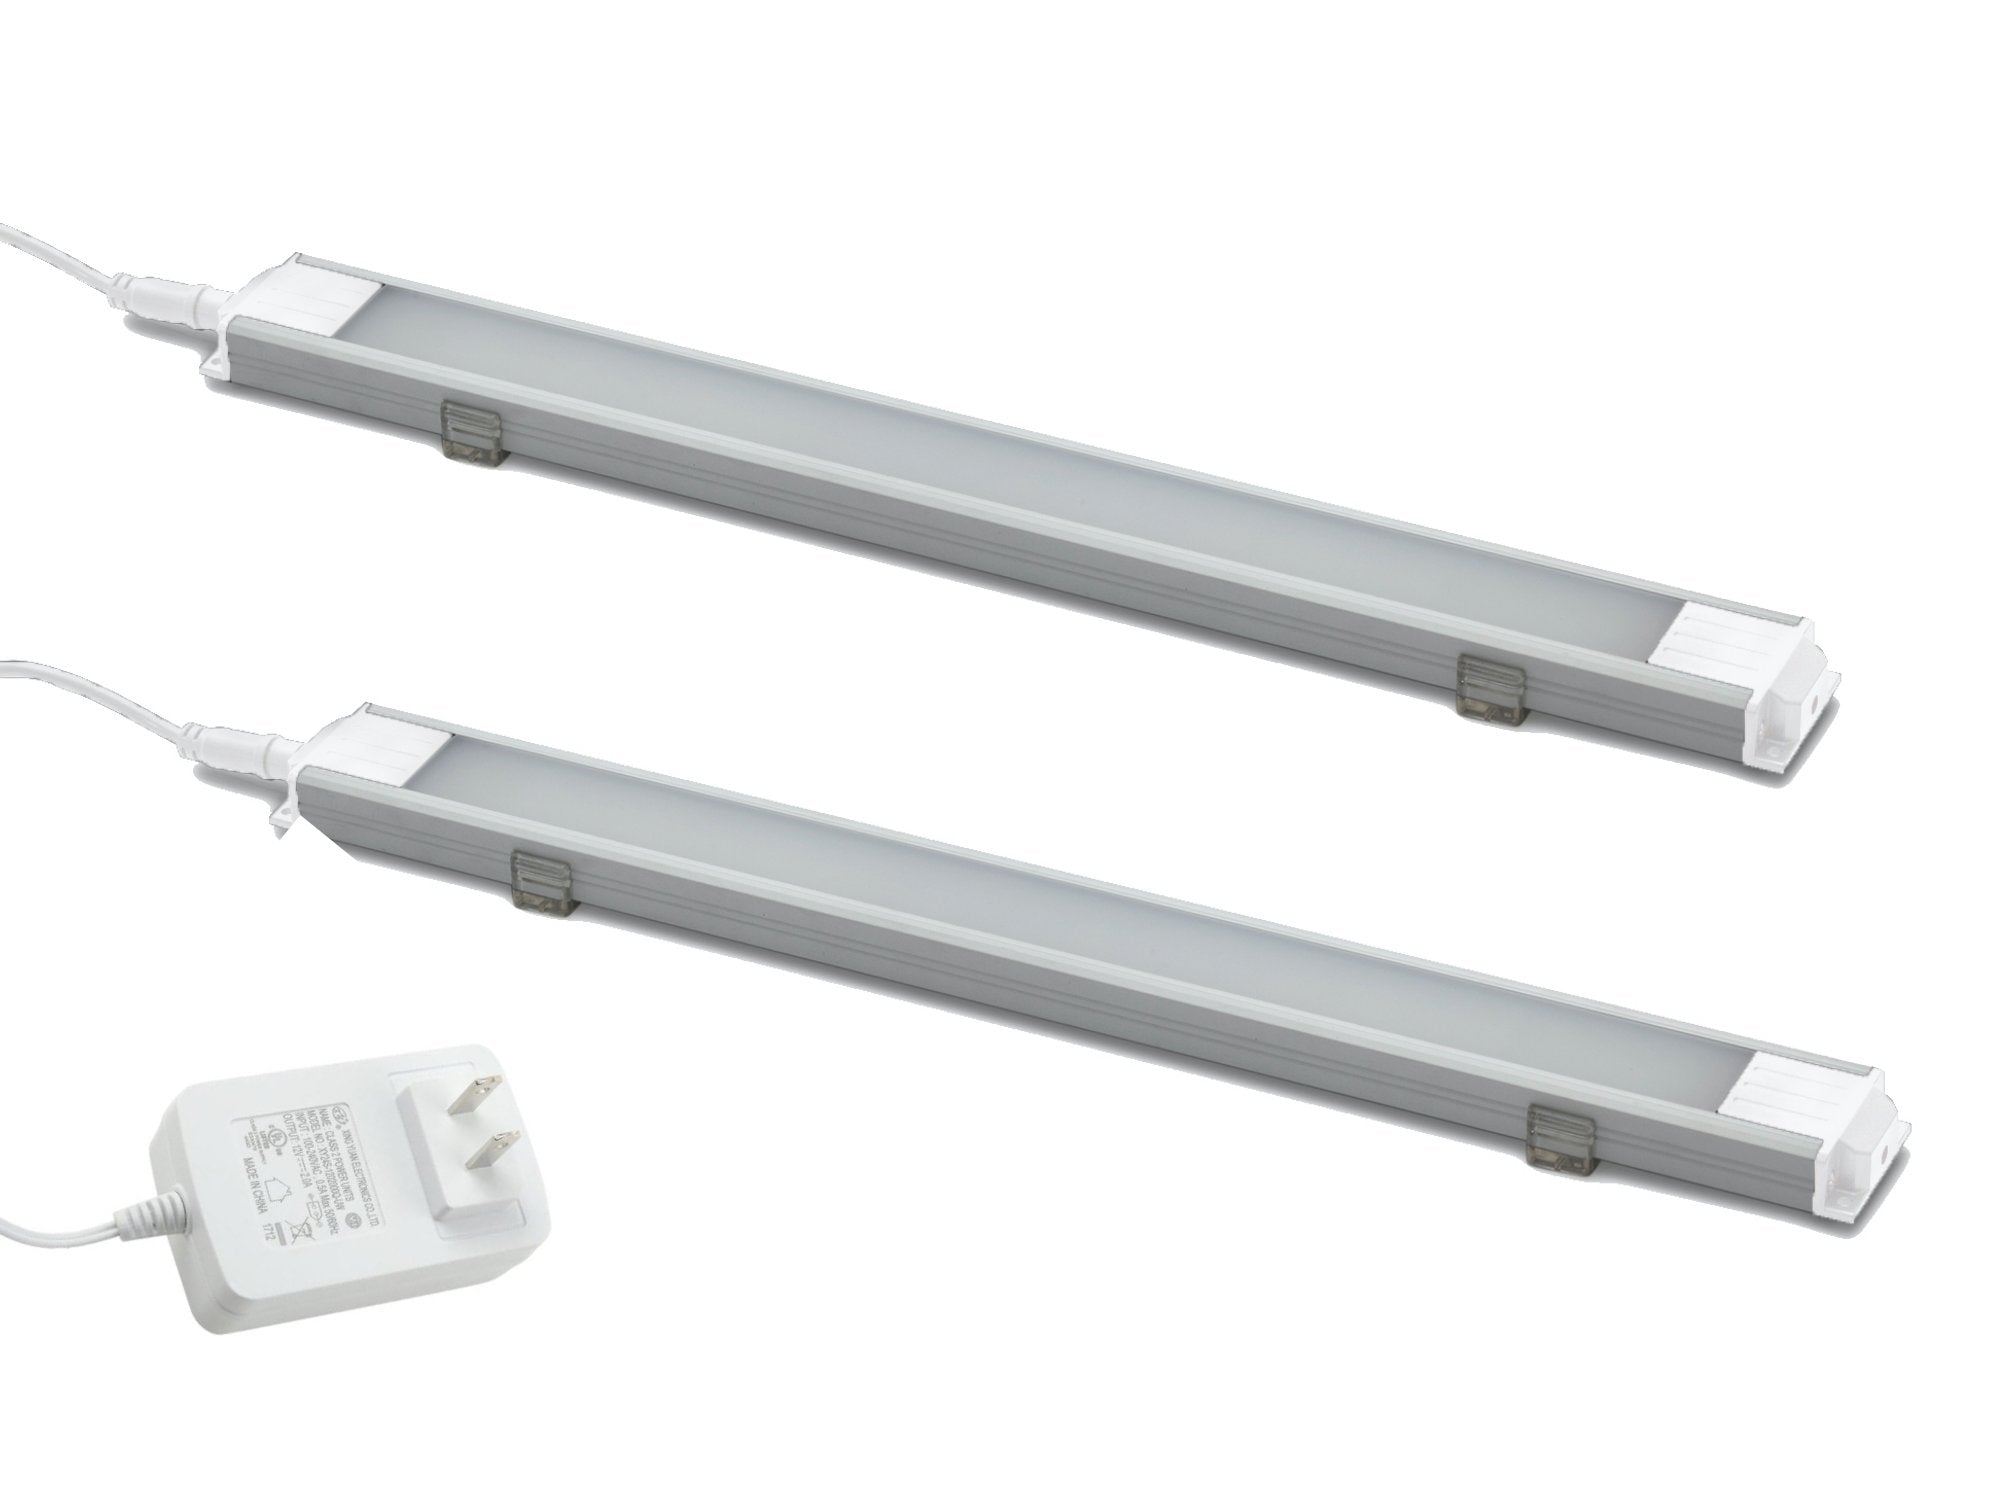 LED Light 2700K with 2 LED light Adapters